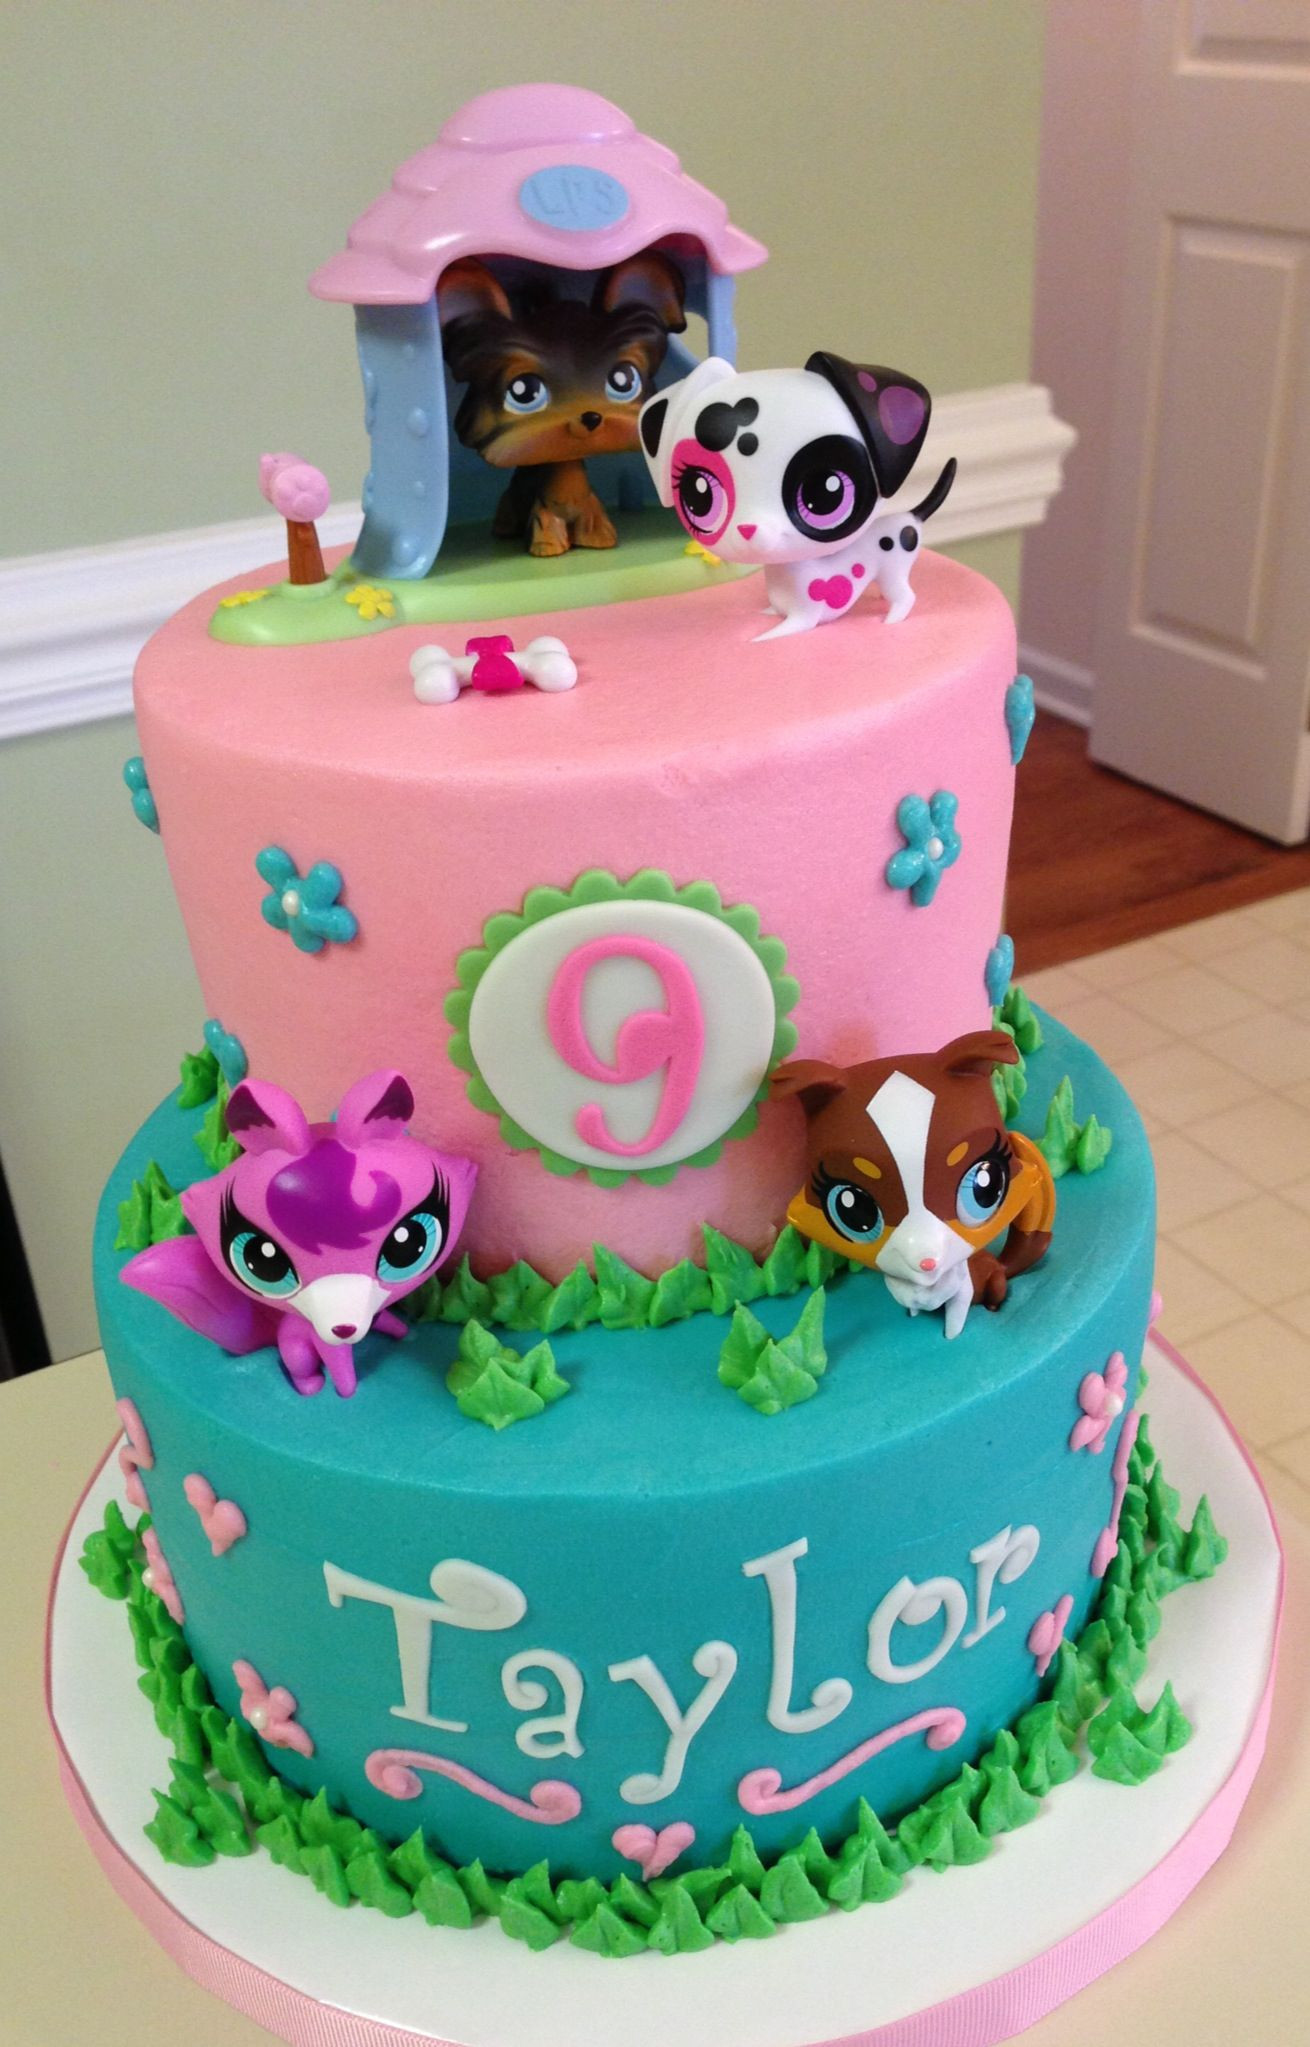 Littlest Pet Shop Birthday Cake
 Littlest Pet Shop buttercream cake with toy figures With